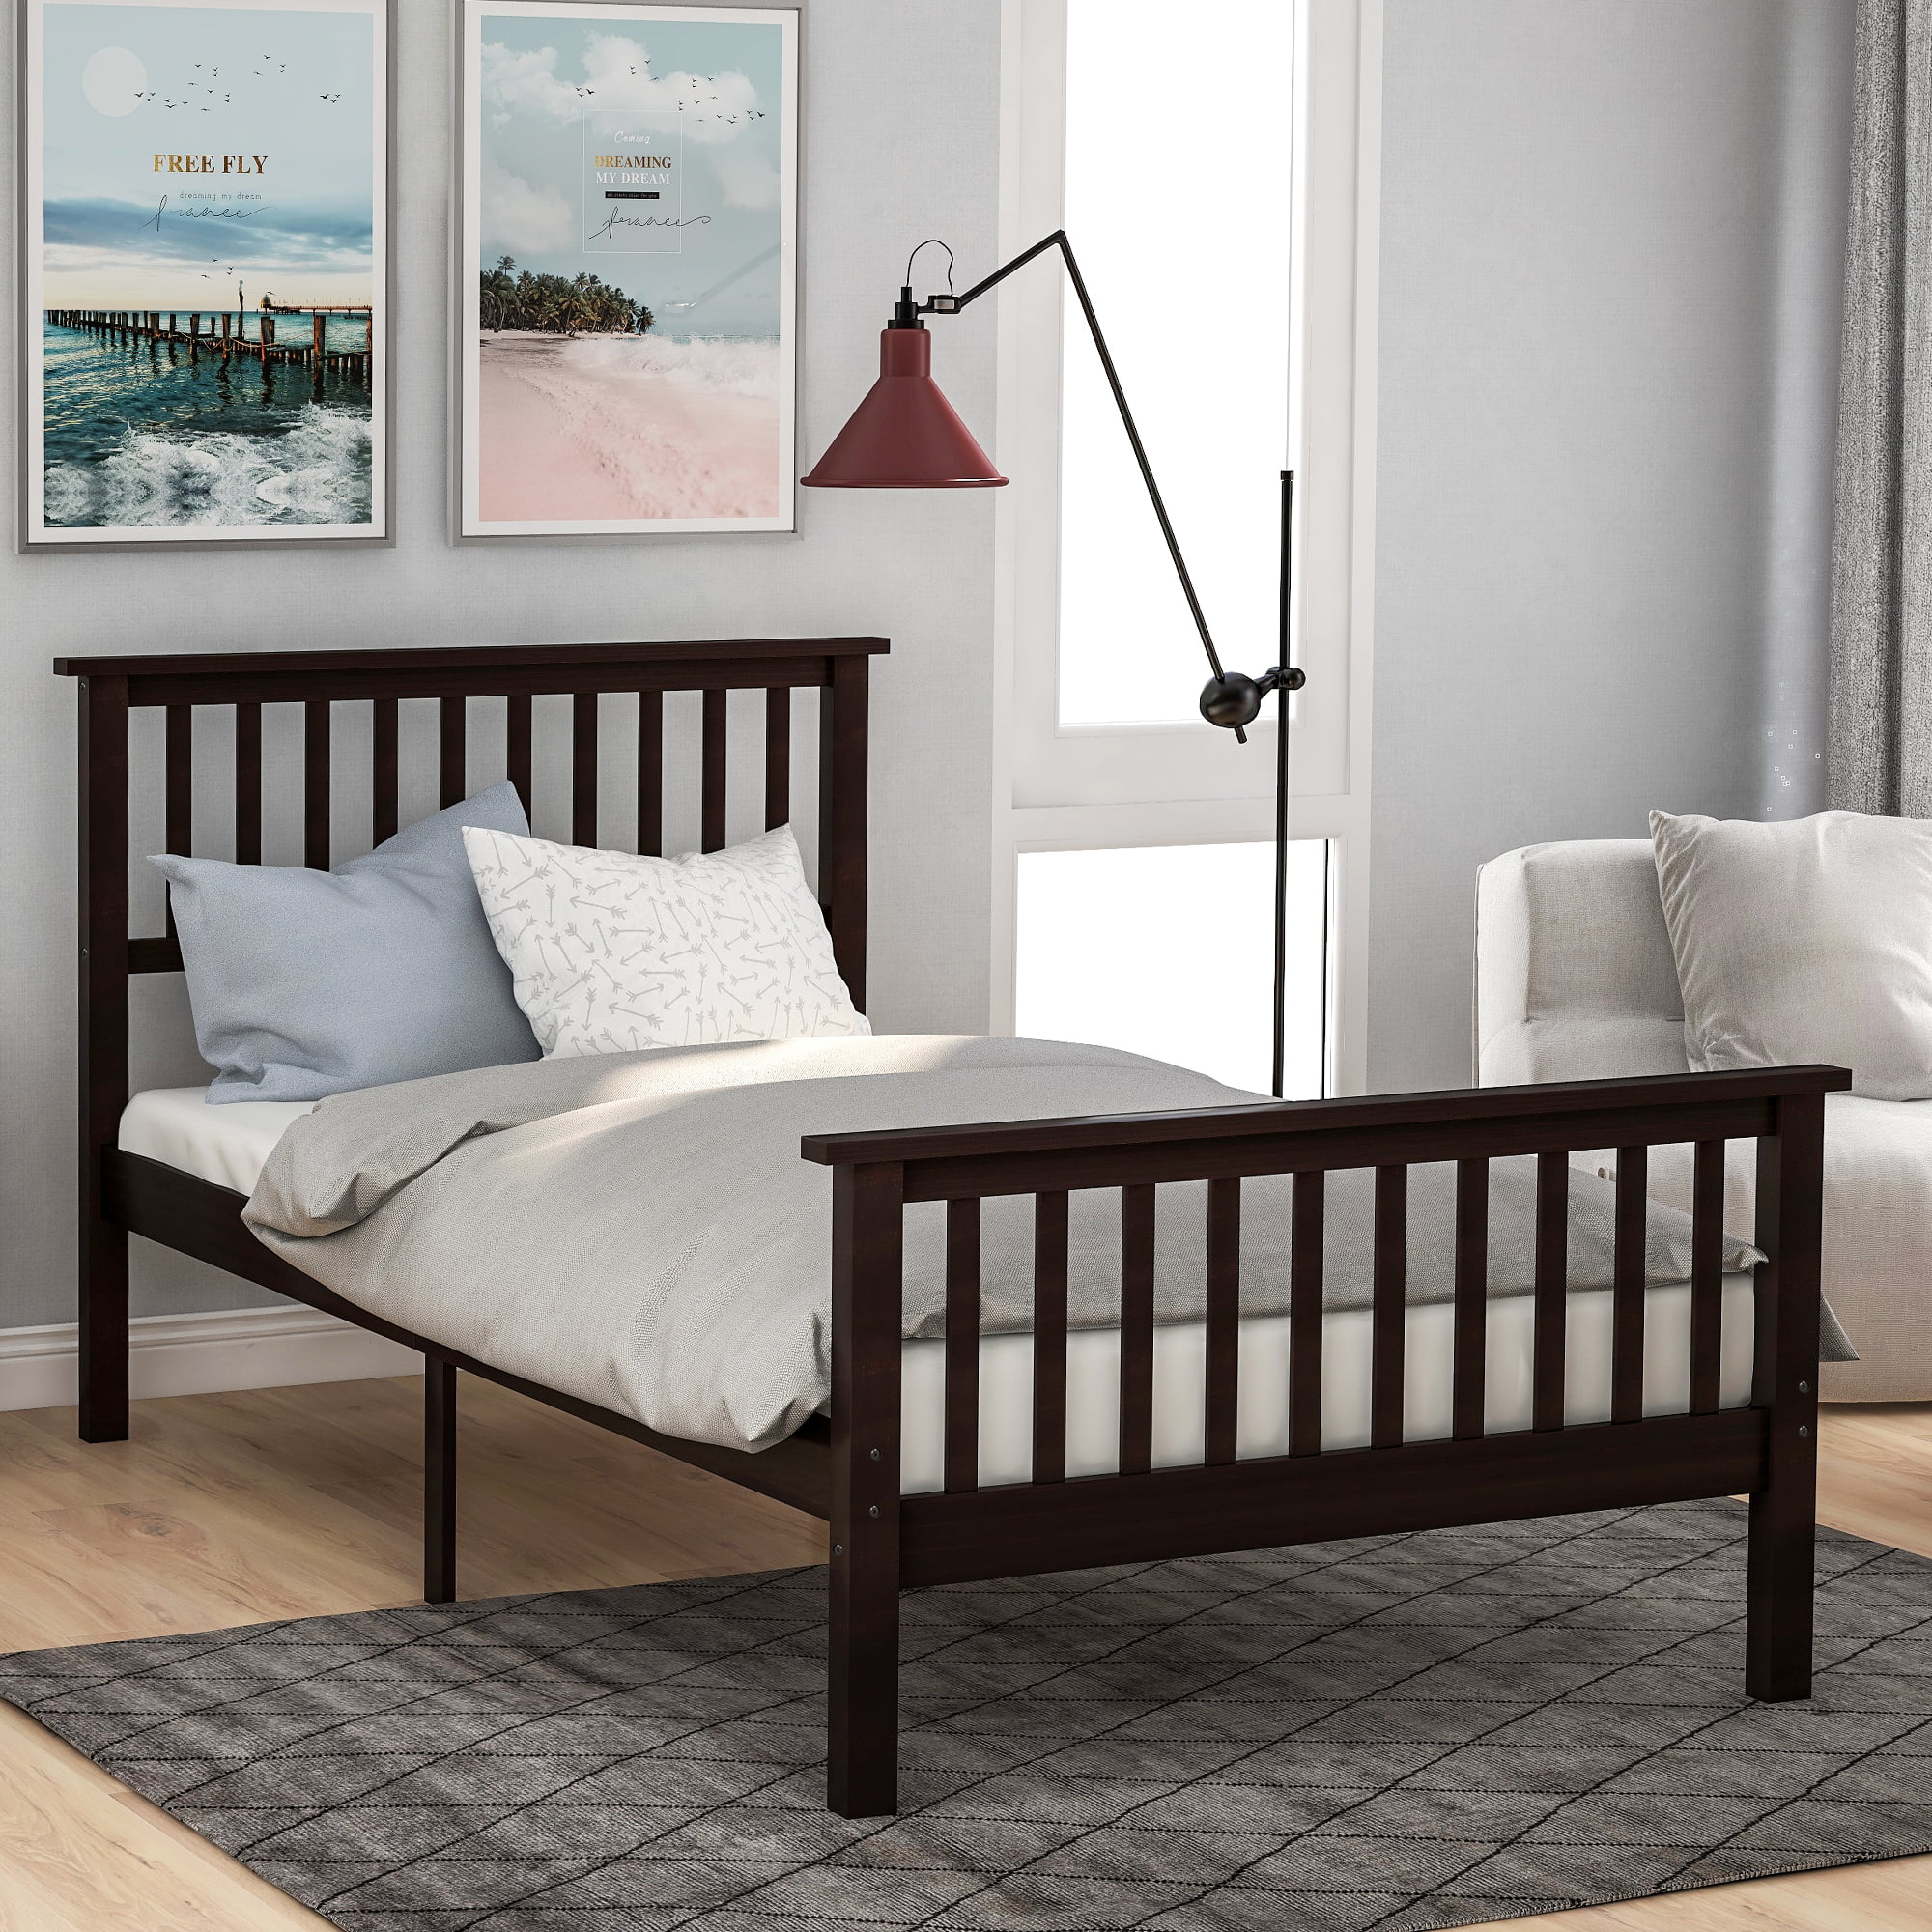 Kids double bed frame